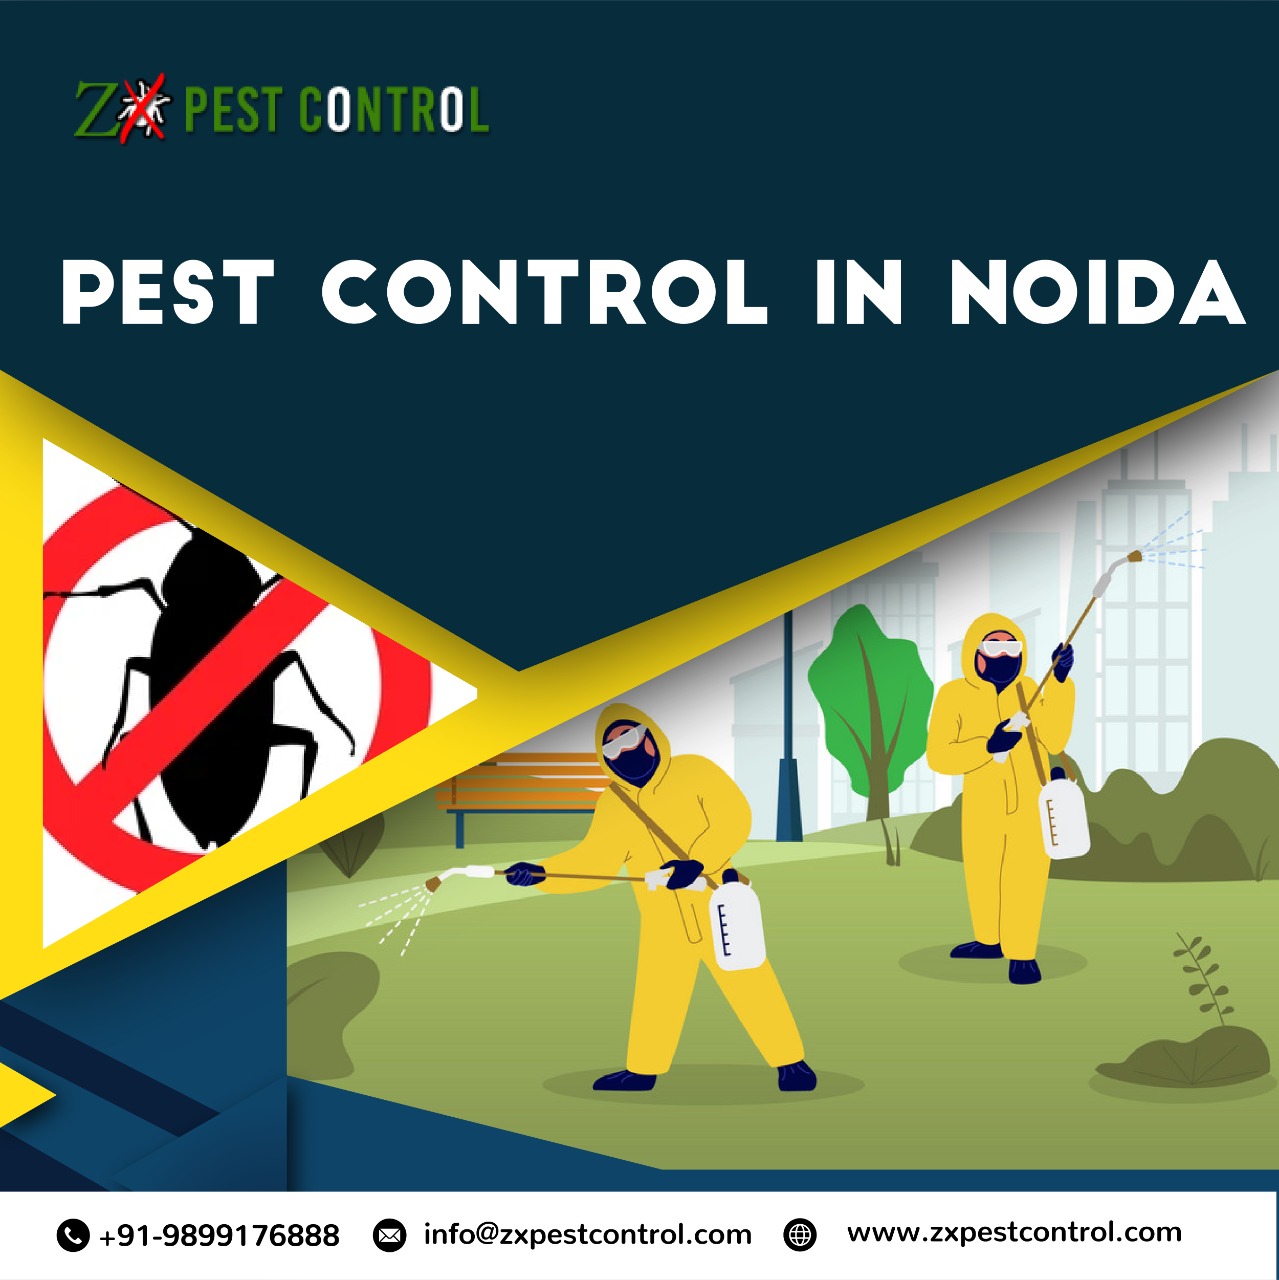 Fast action Pest Control Service in Noida